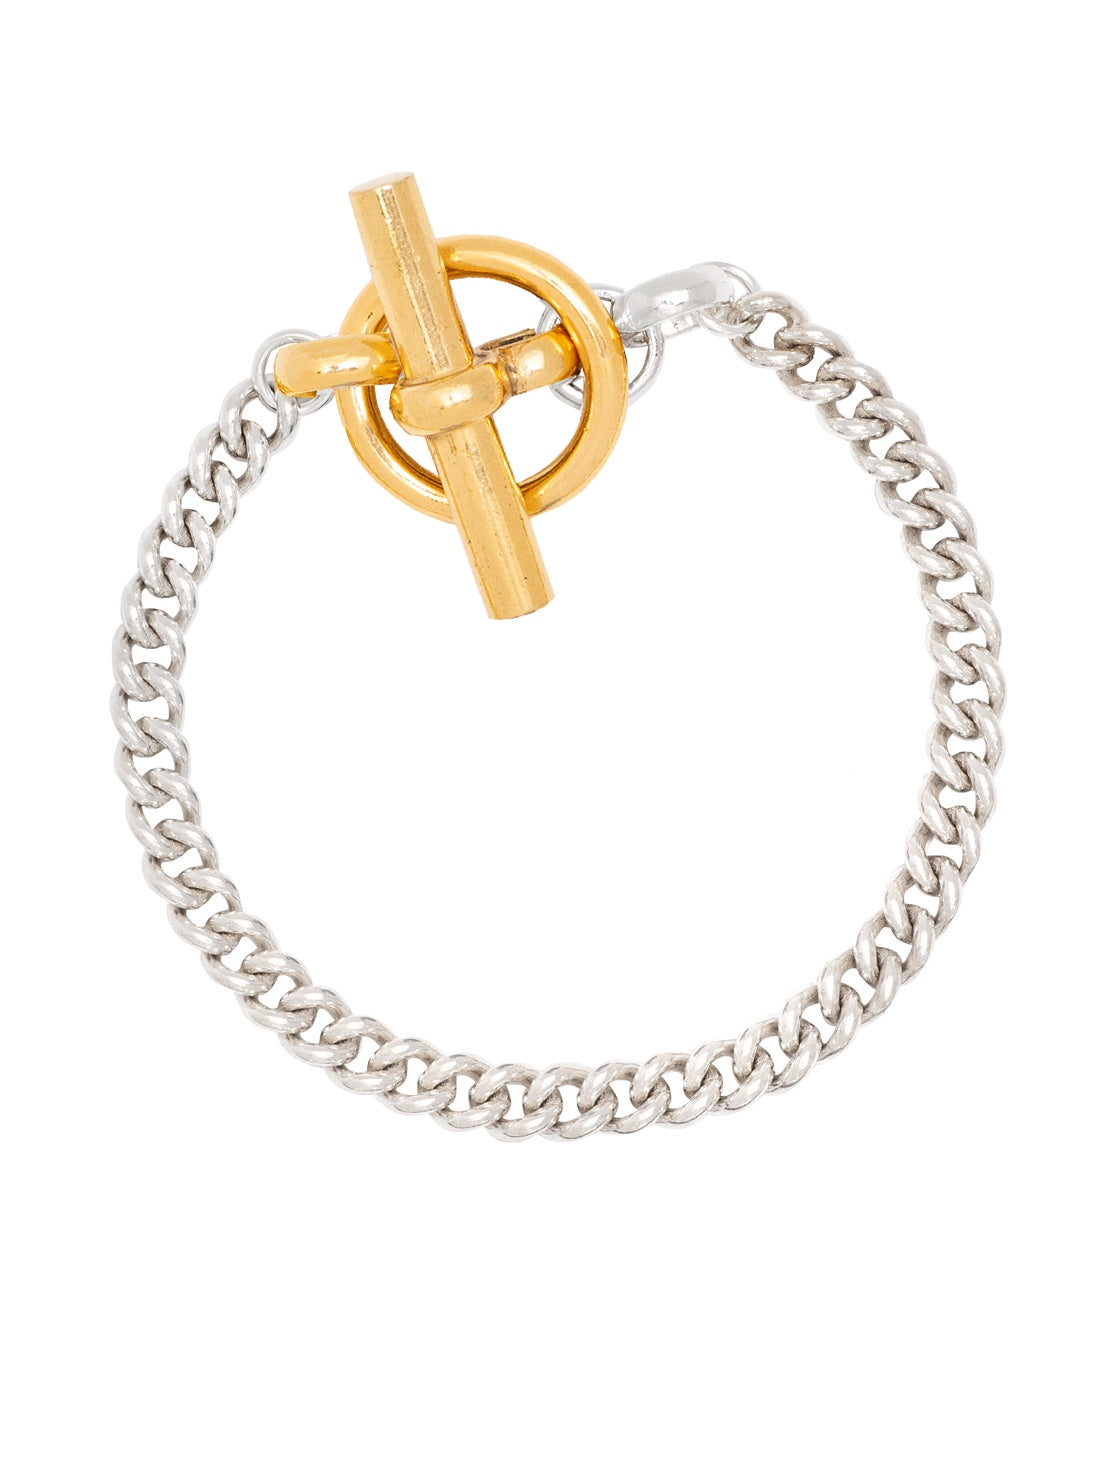 TS Gold and Silver Curb Link Bracelet